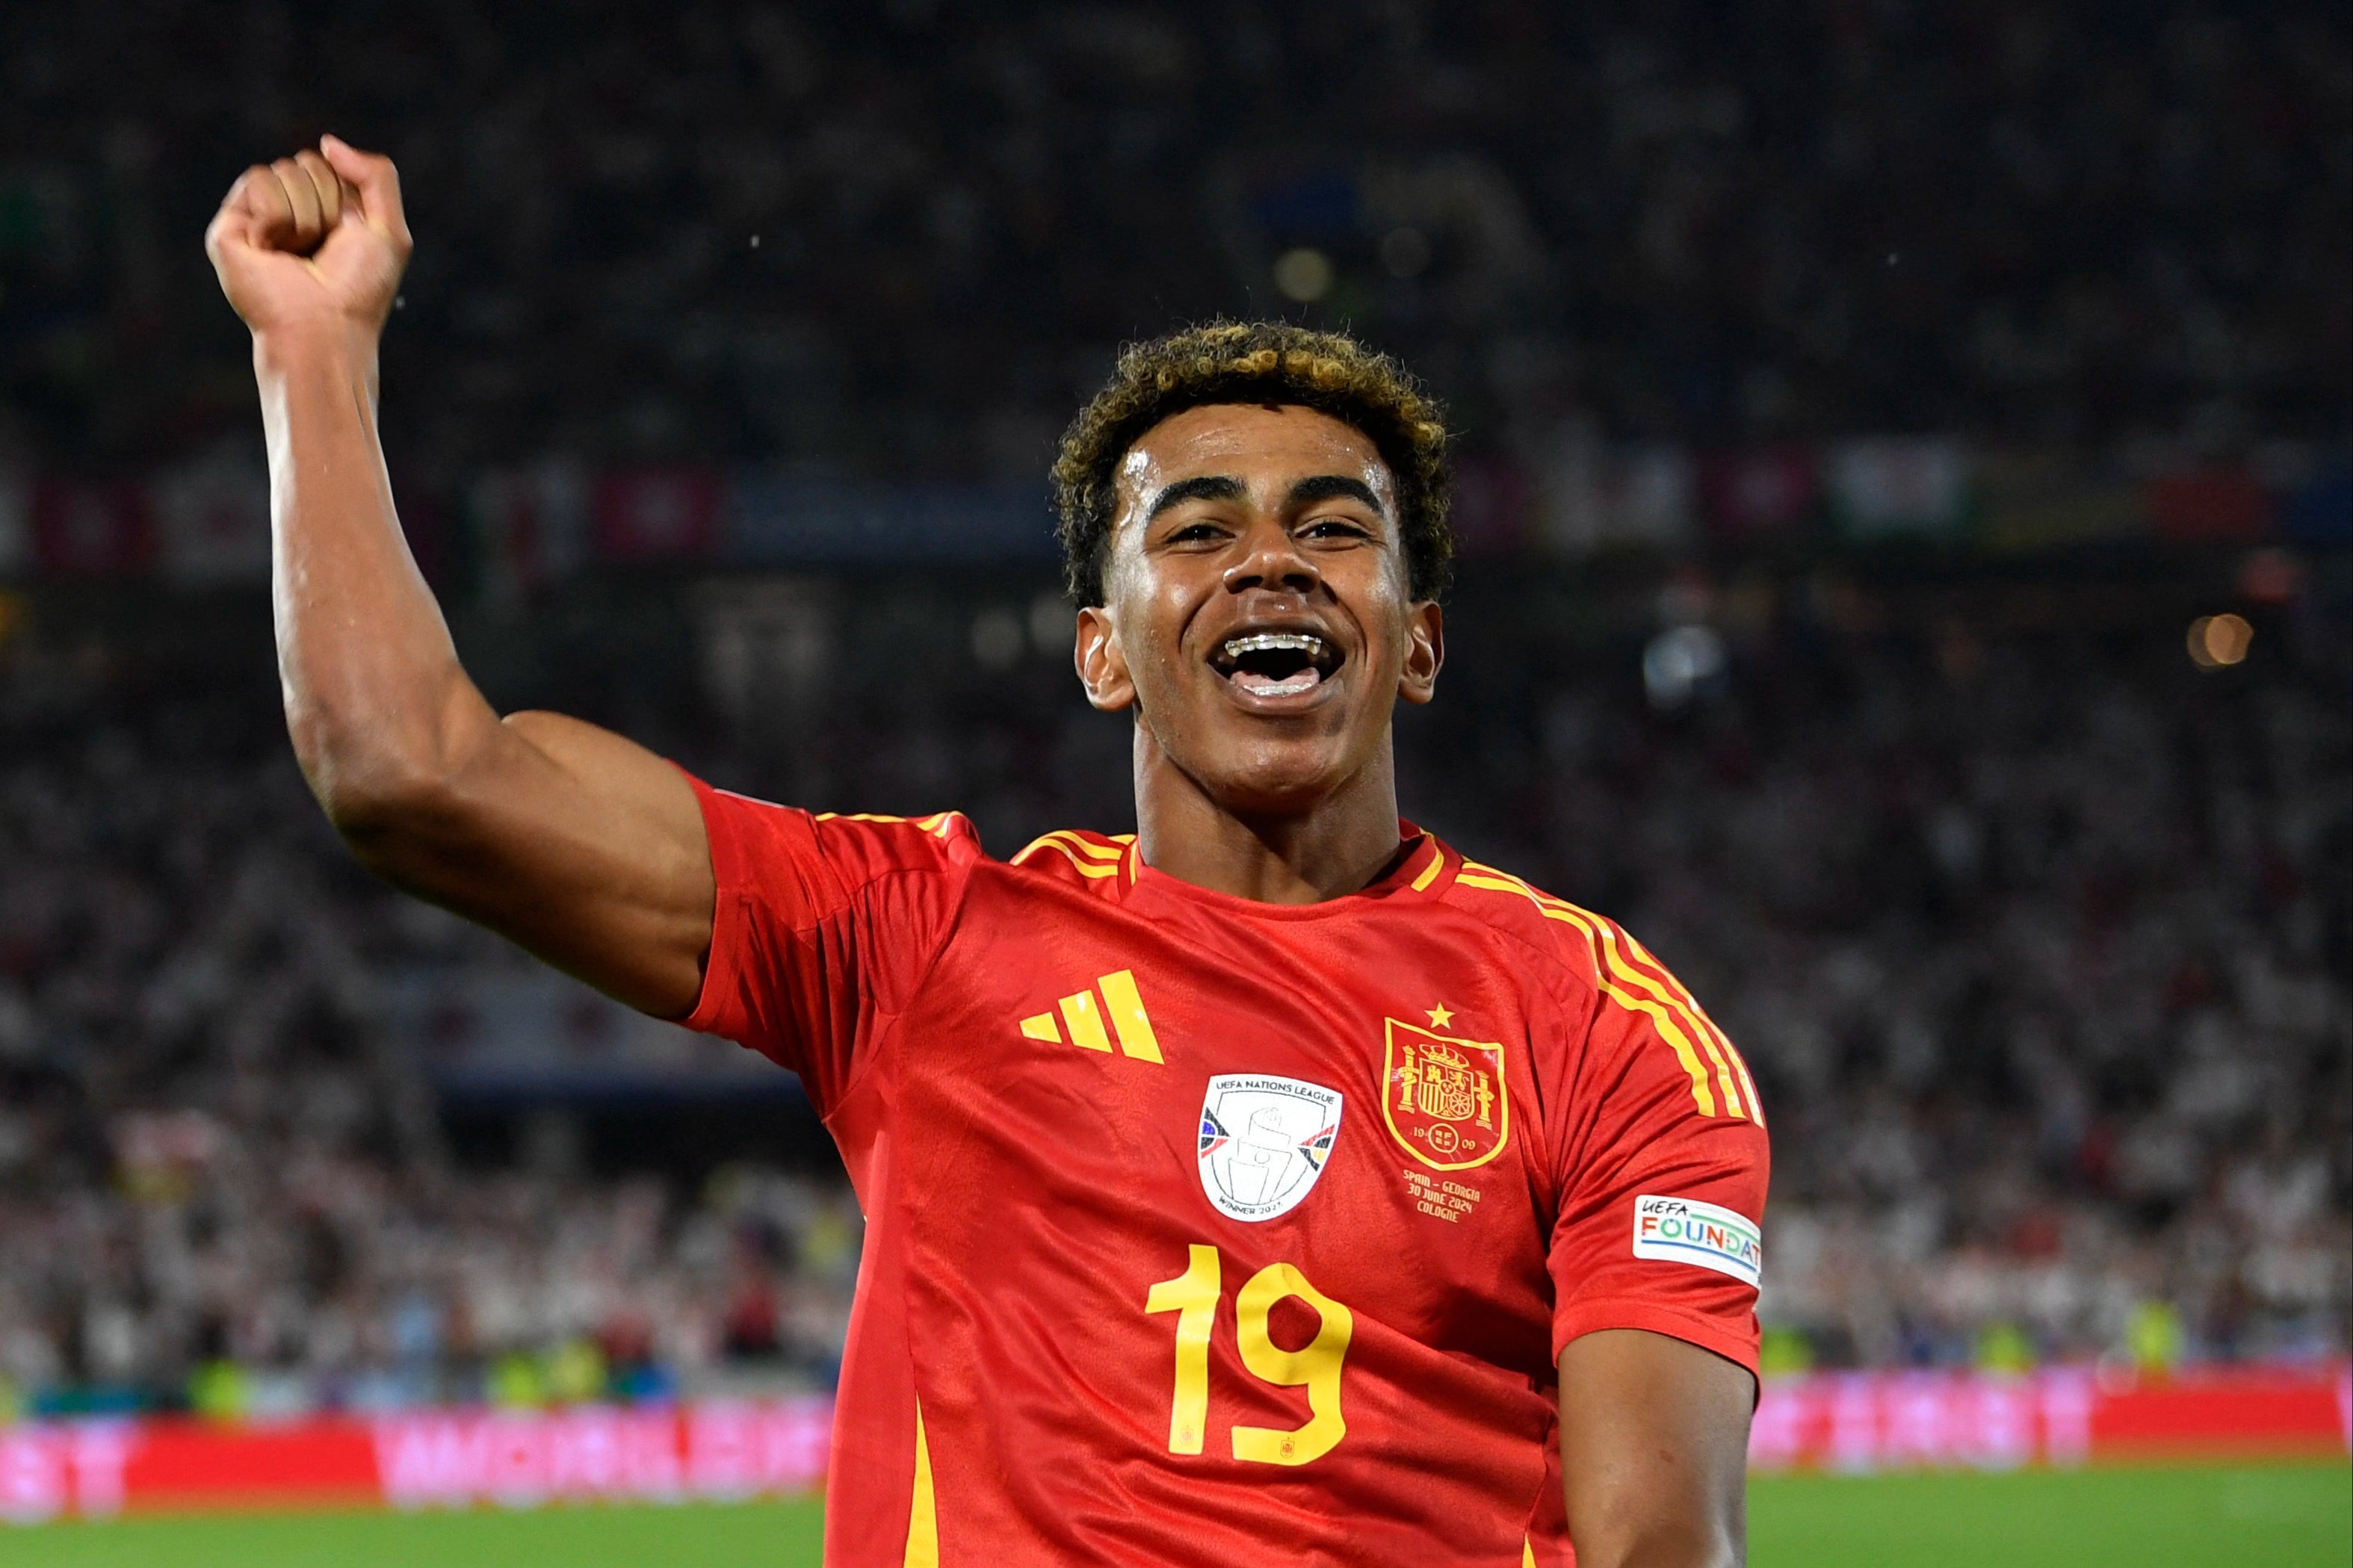 Spain’s Lamine Yamal has sparkled during Euro 2024